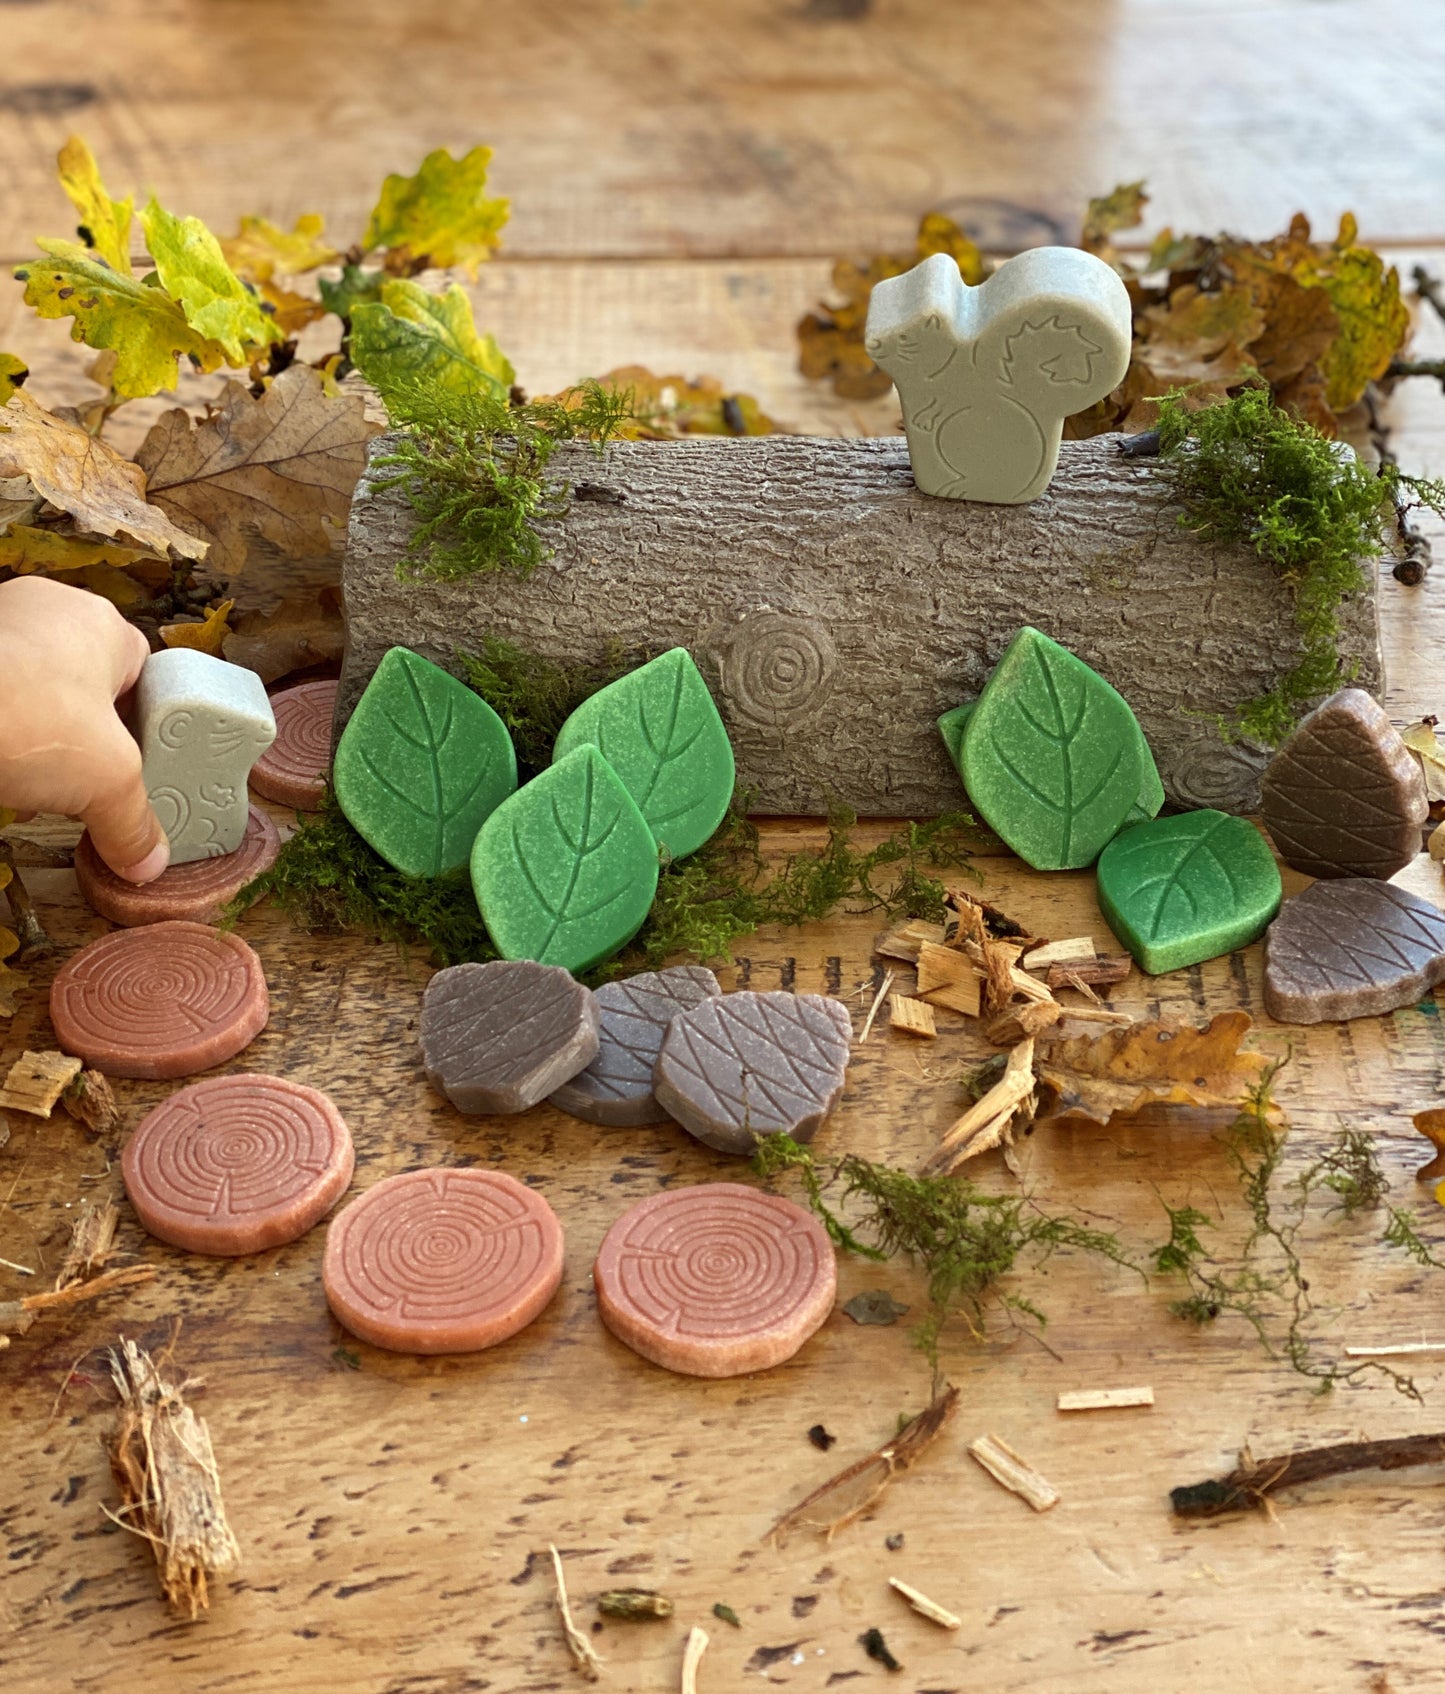 Scenery Stones – Forest Play